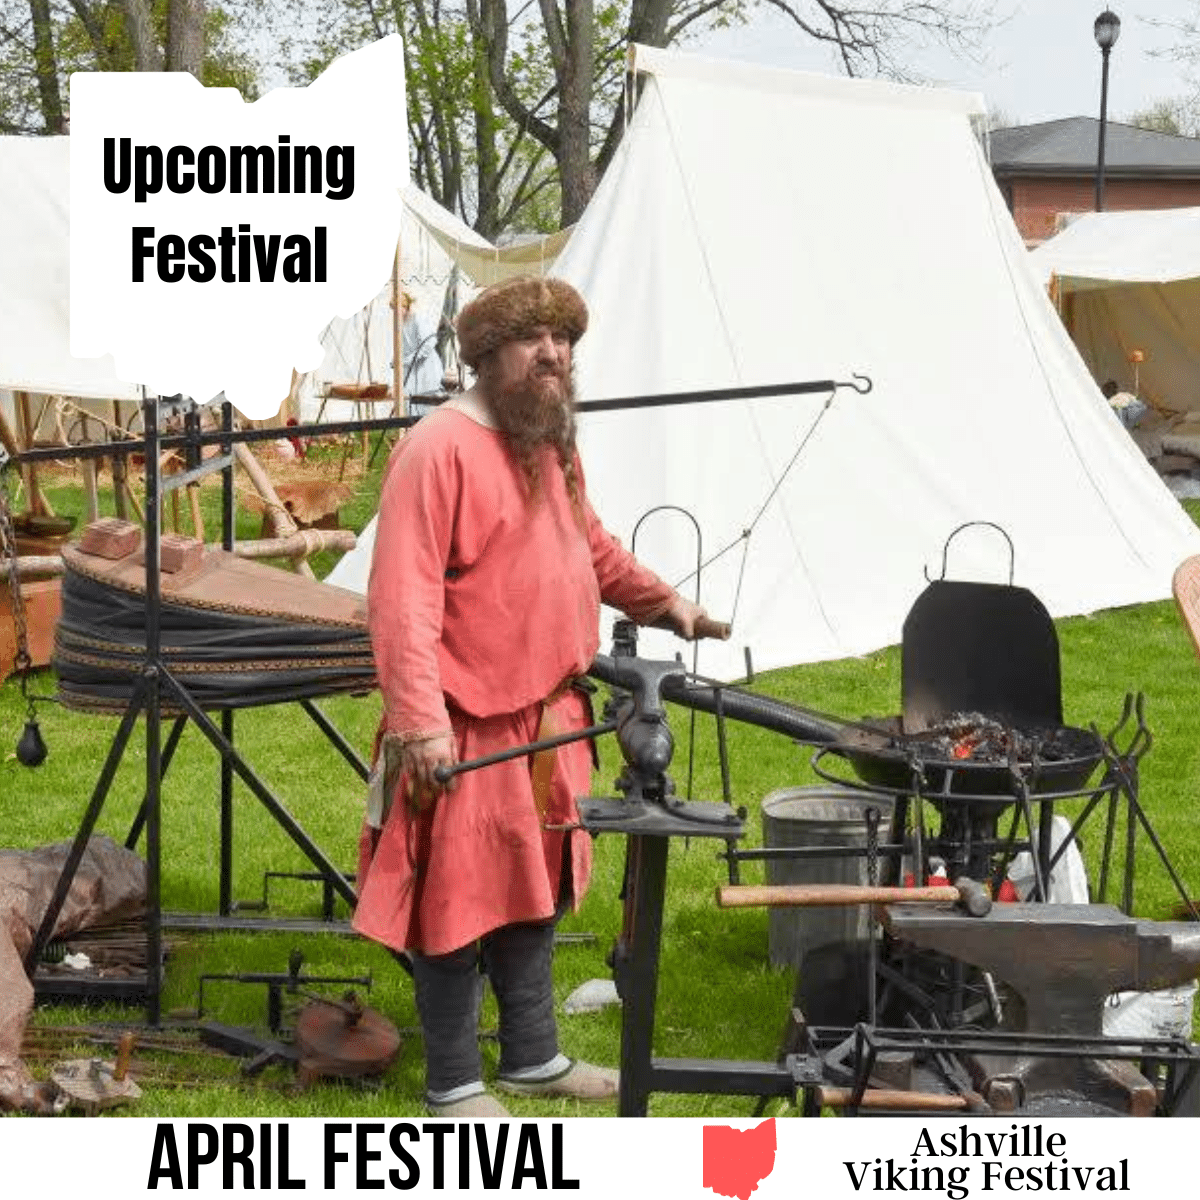 A square image with a photo of a man in period-appropriate costume standing next to blacksmith tools and a small grill. A white tent is in the background. A white image of Ohio has text Upcoming Festival. A white strip across the bottom says April Festival Ashville Viking Festival.